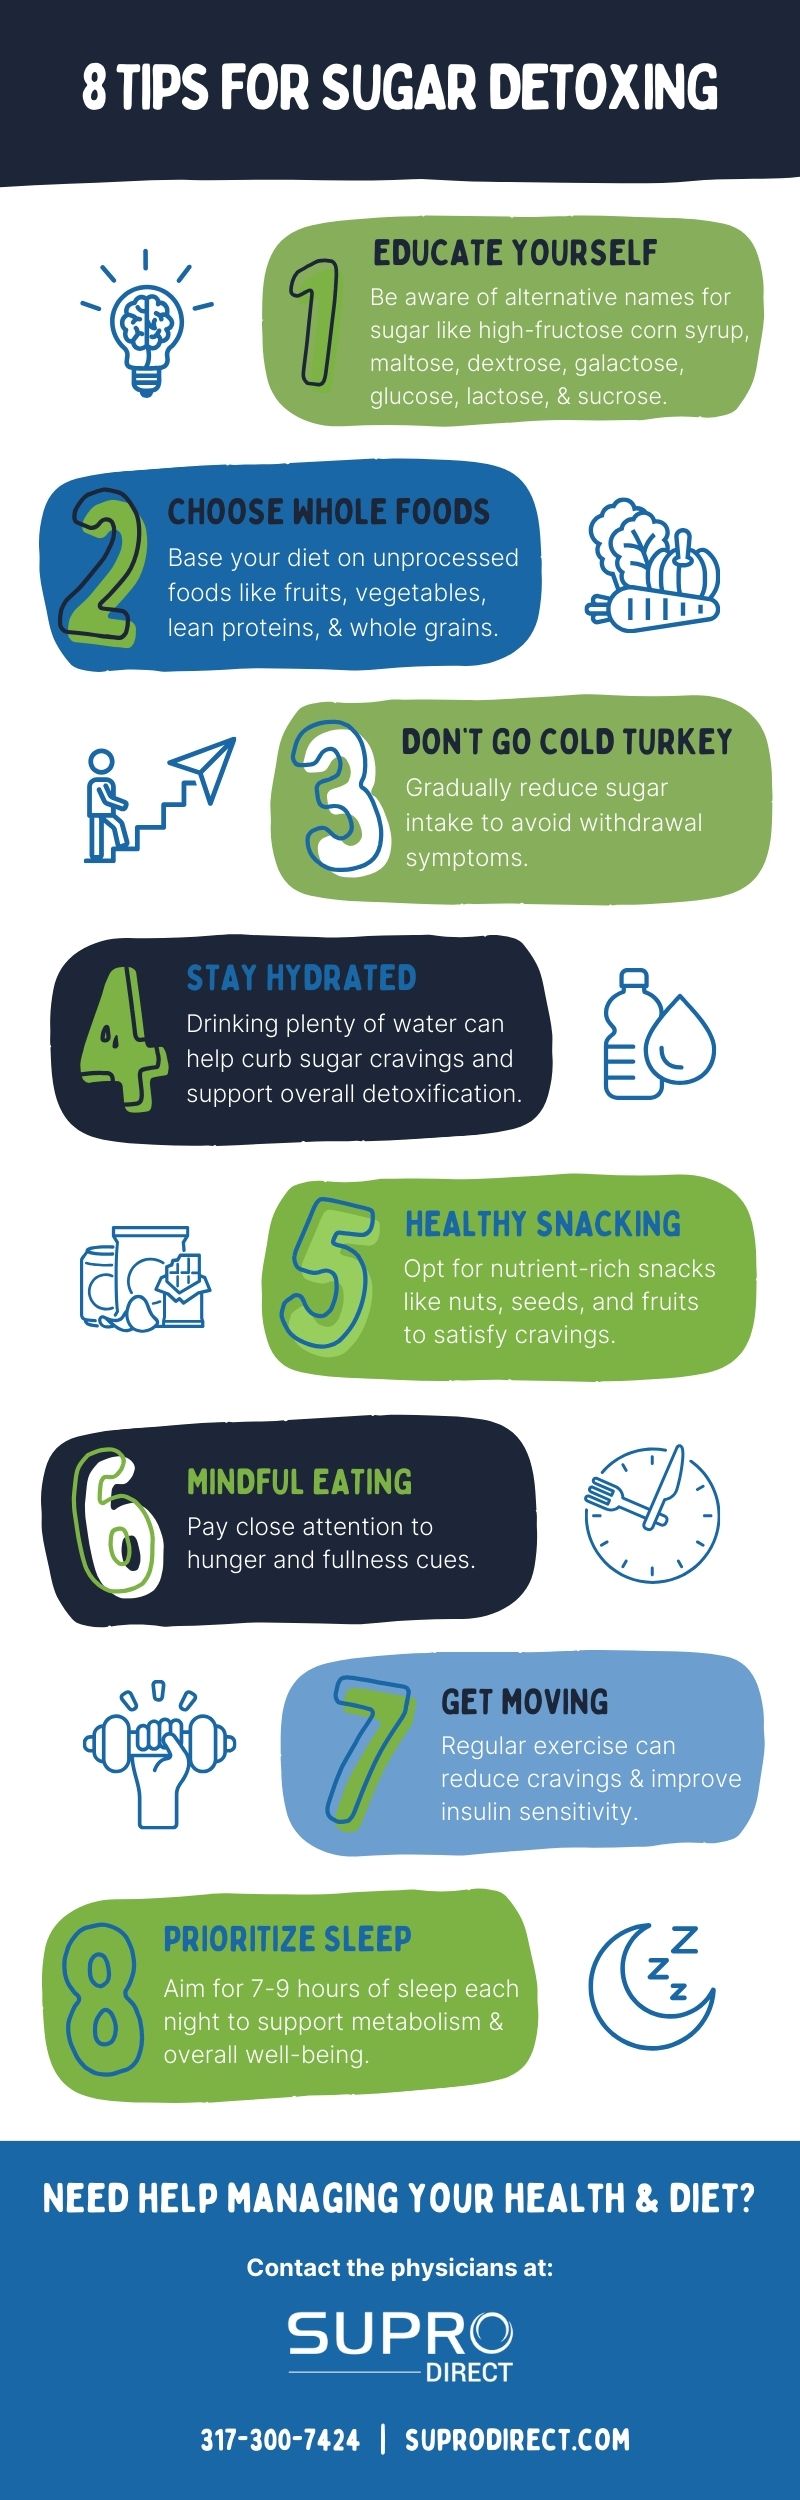 8 tips for sugar detoxing infographic